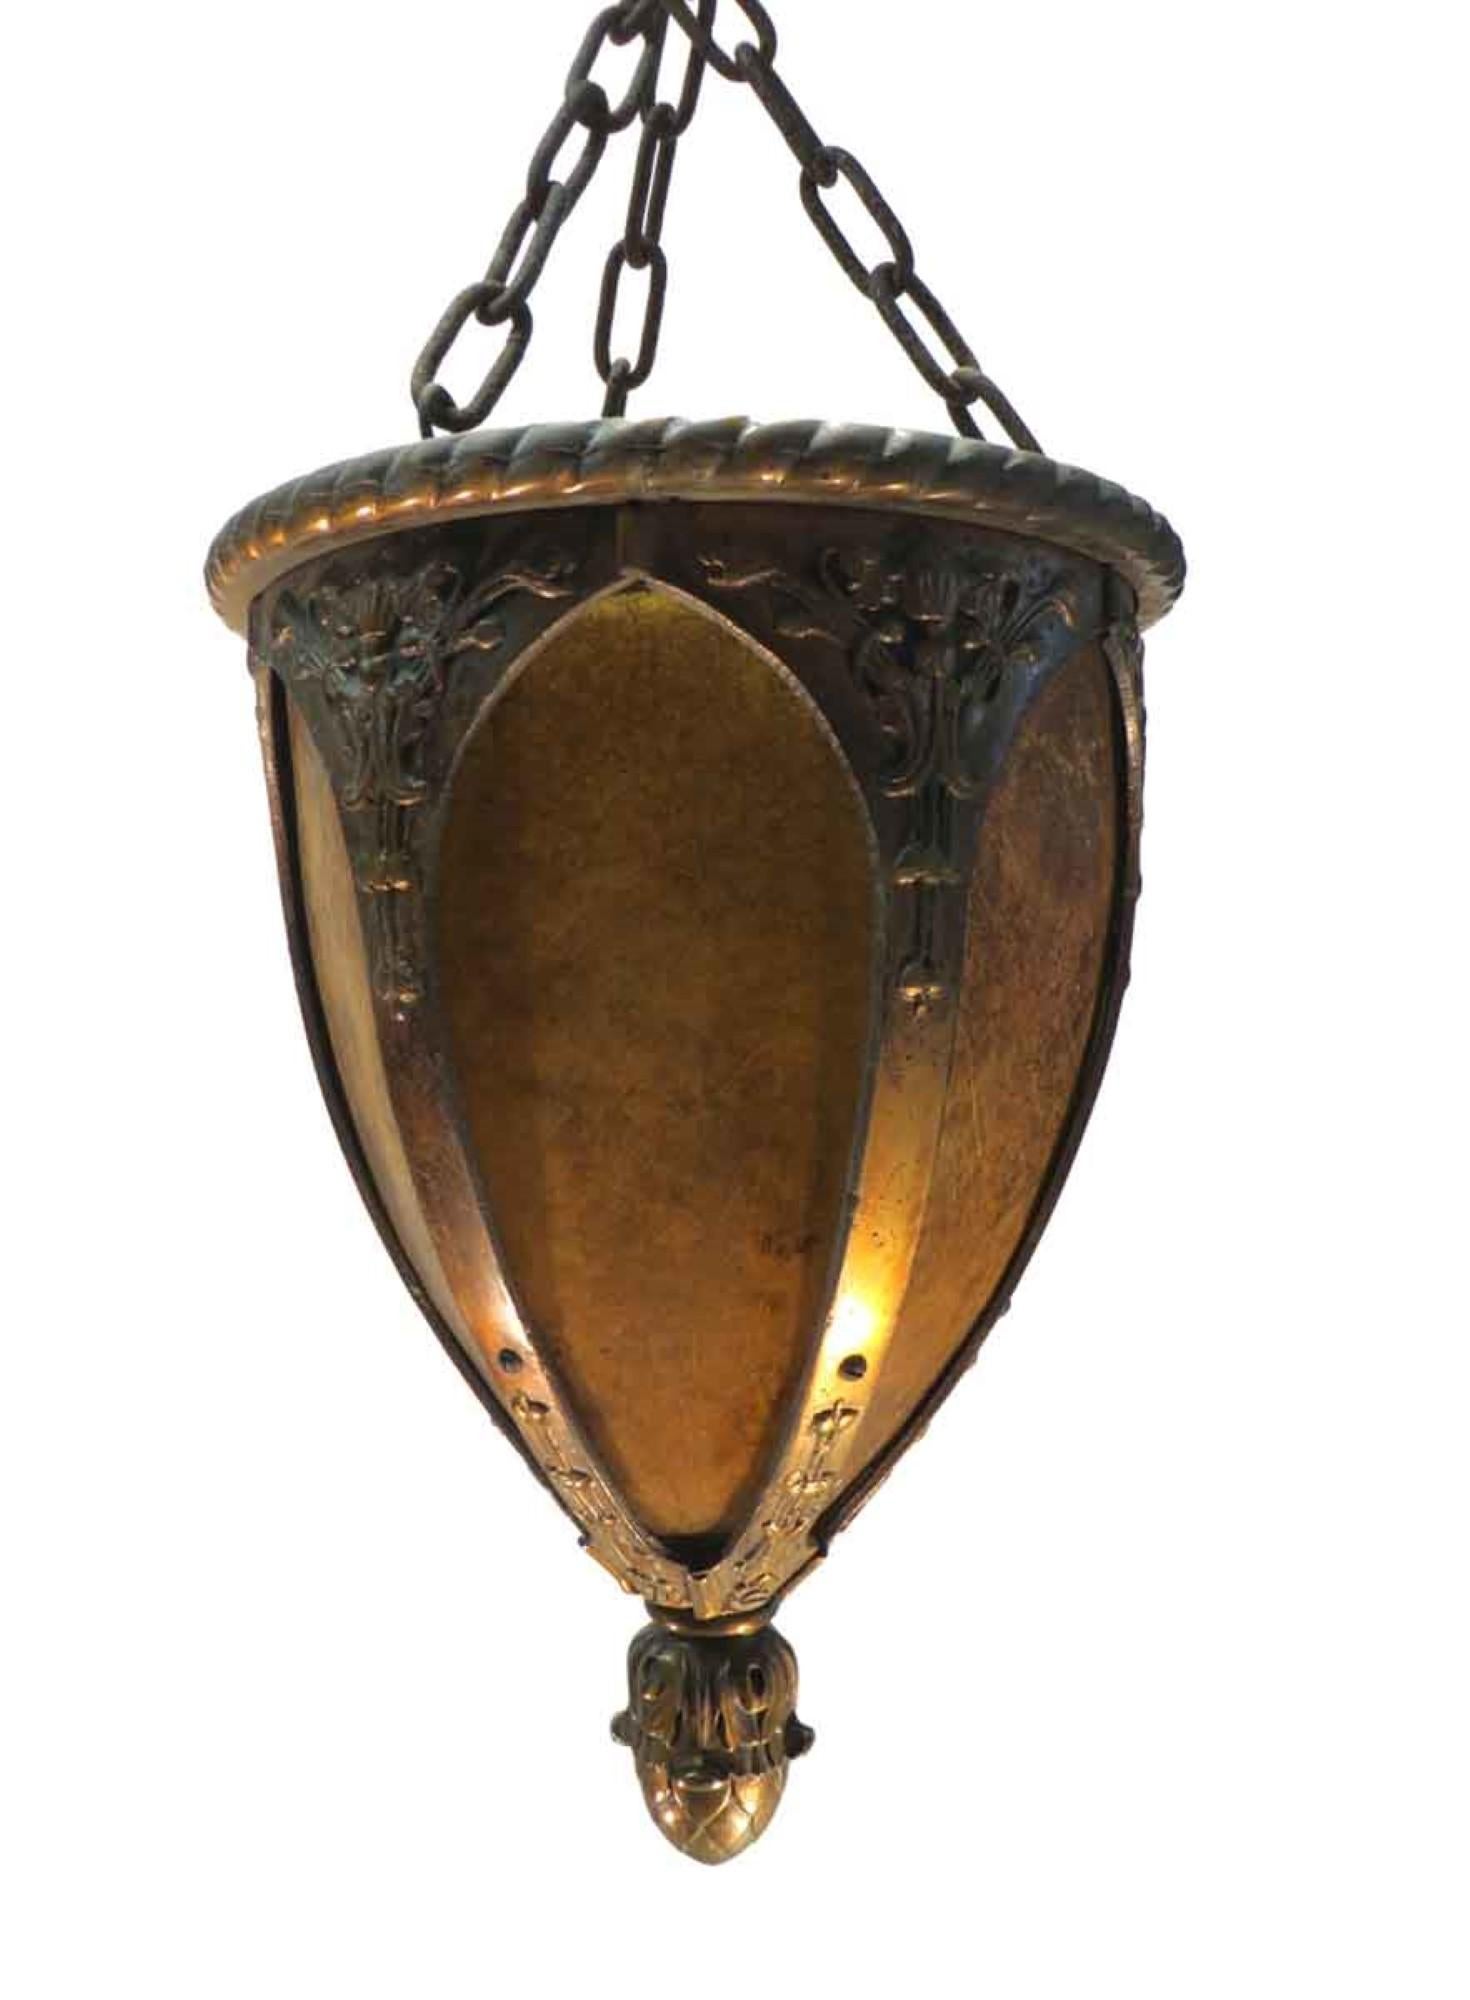 1900s entryway pendant lantern light with Art Nouveau details in cast bronze with mica shades and canopy. Cleaned and rewired.